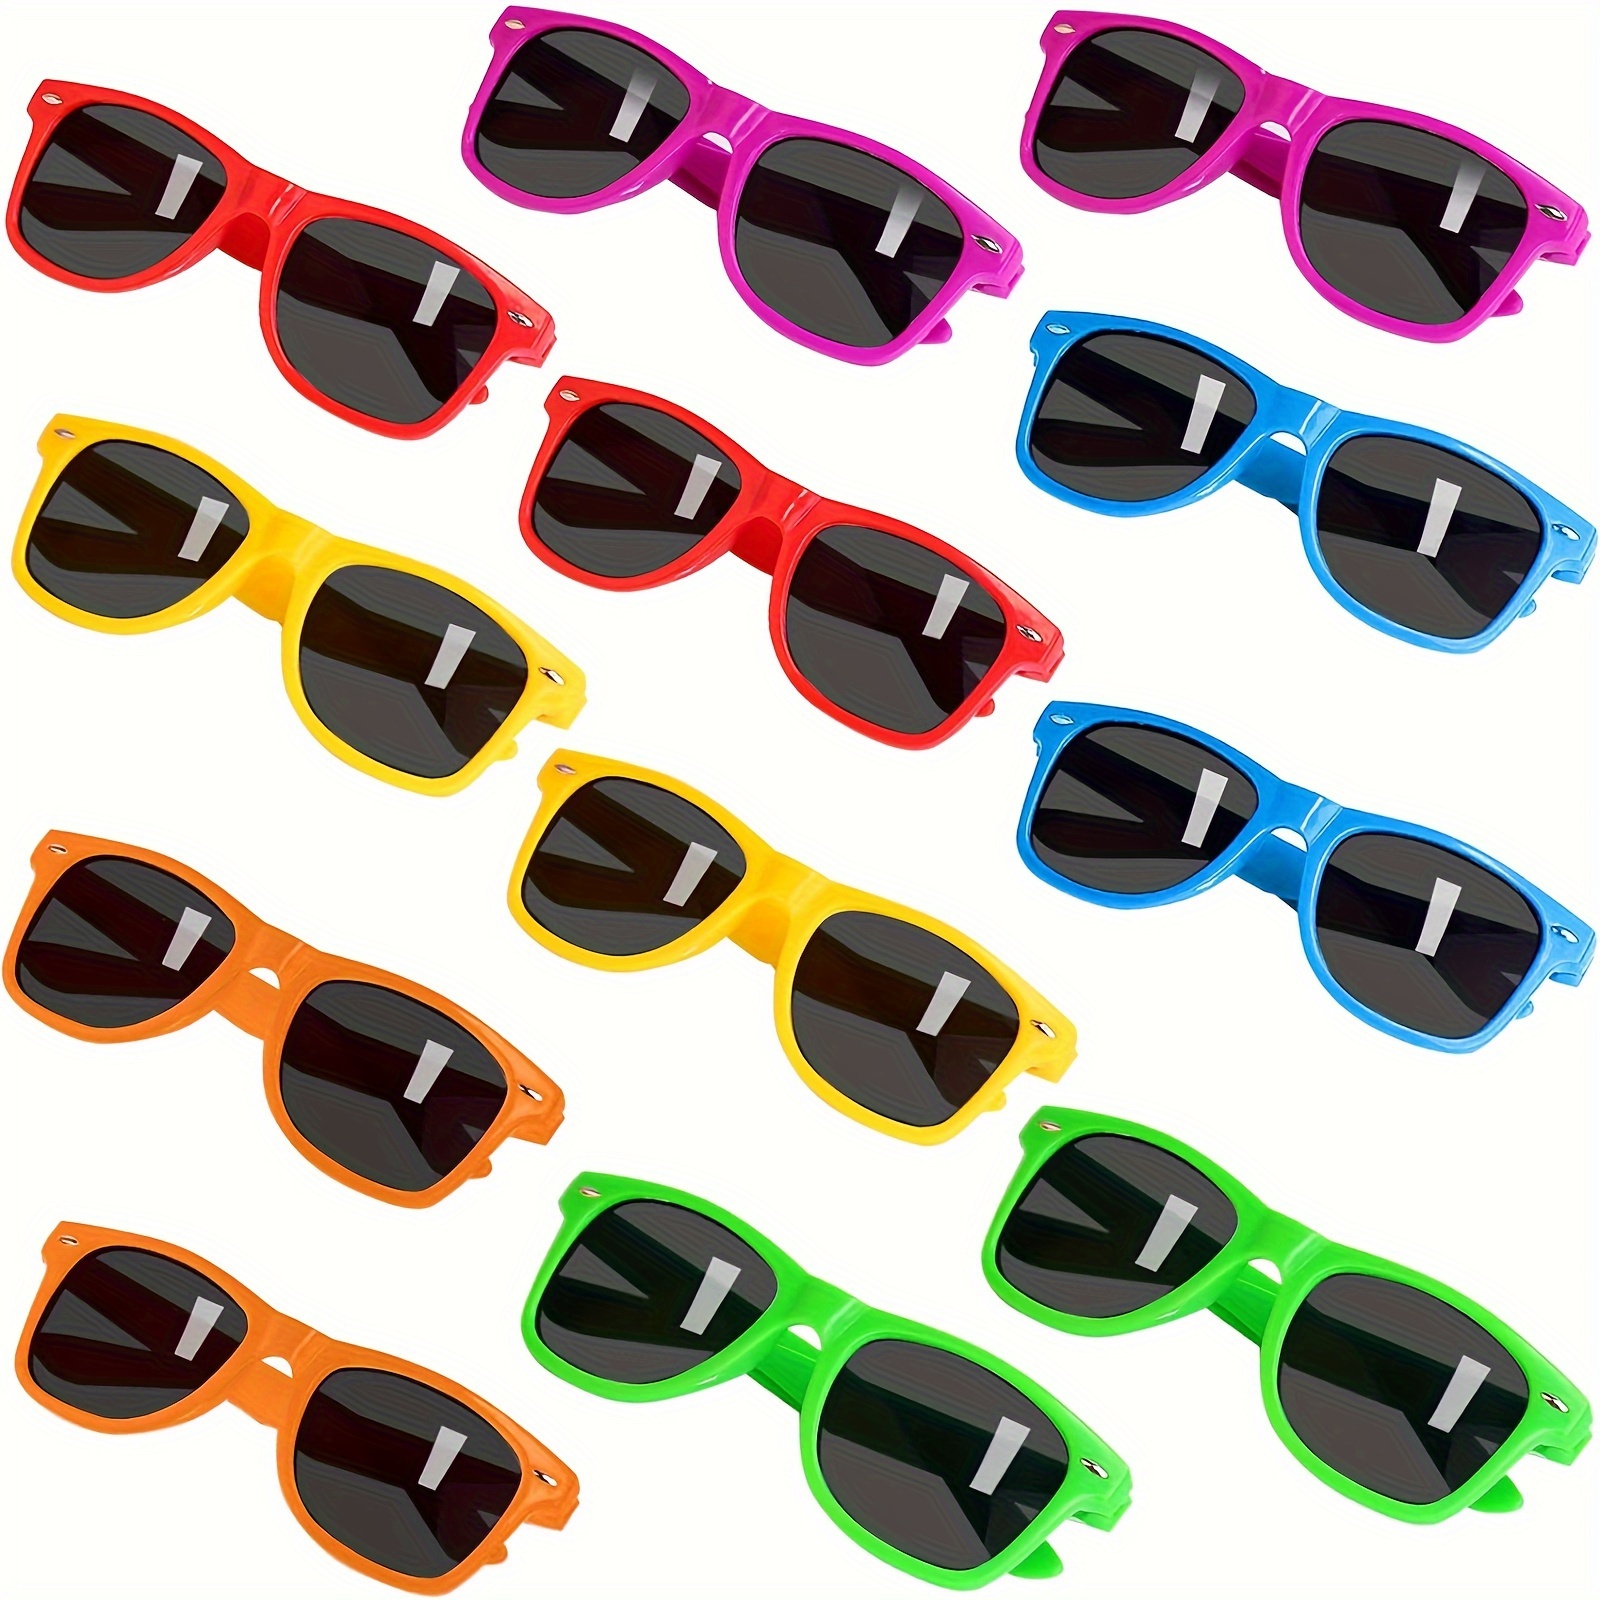 

Party Sunglasses For Kids With Uv400 Protection Eyewear Neon Sunglasses For Boys, Girls - Great Gift For Party Favors, Birthday Party And Outdoor Activity